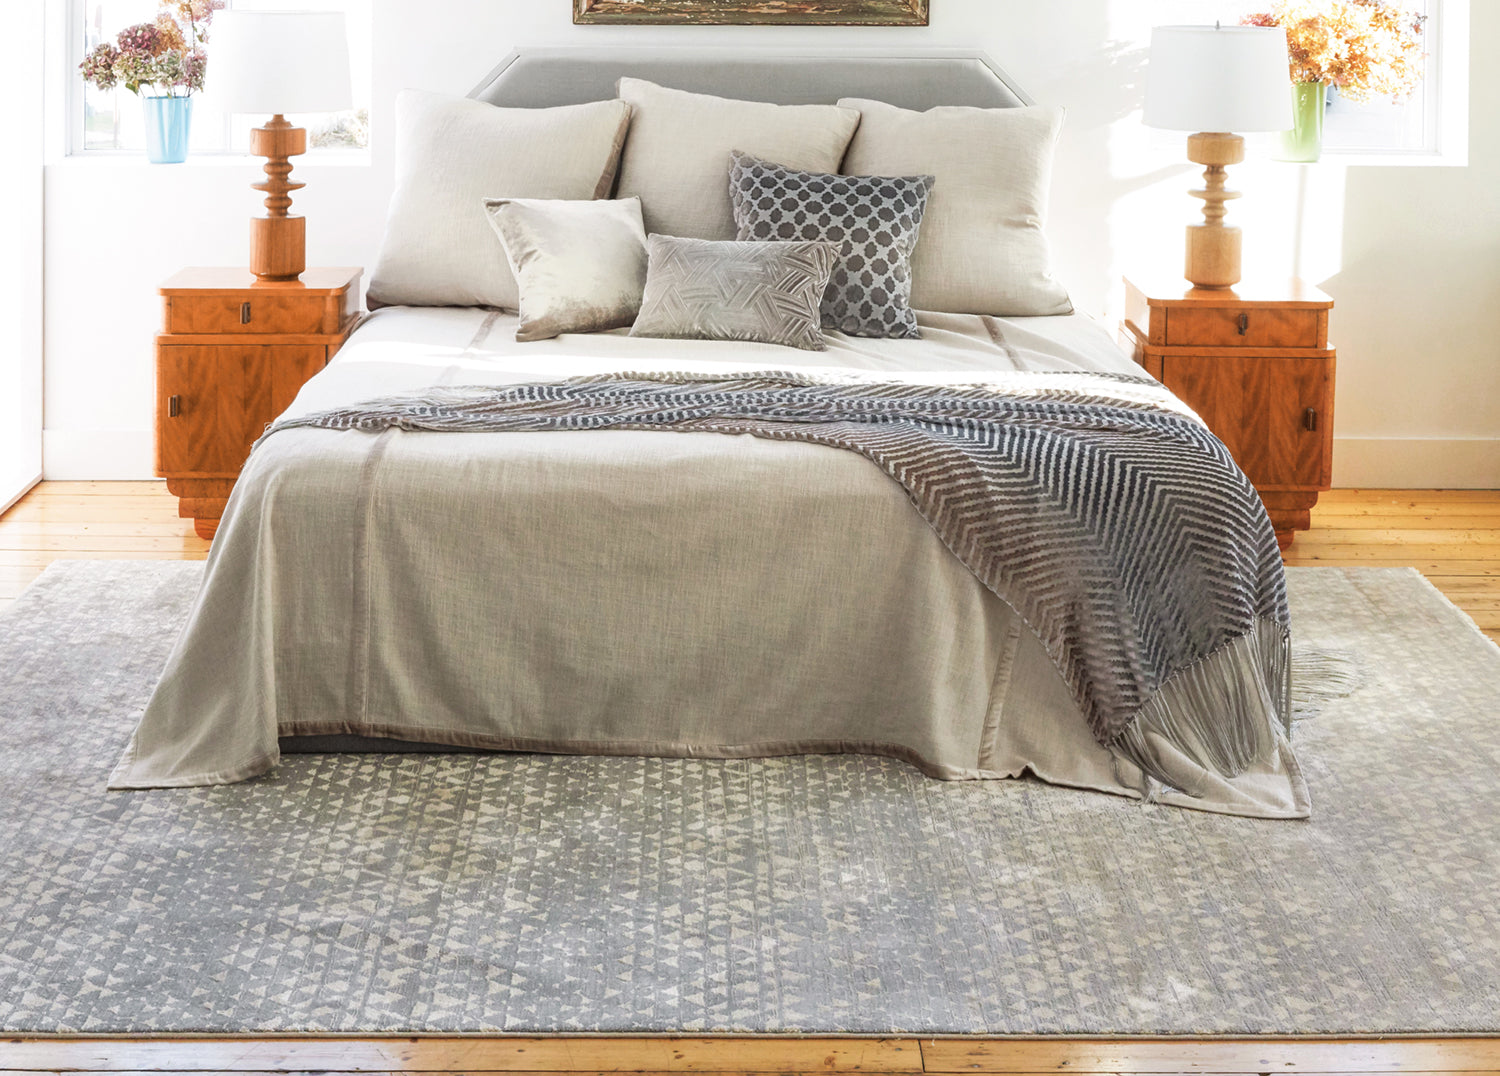 Chunky Weave Biscotti Cotton Coverlet by Kevin O'Brien